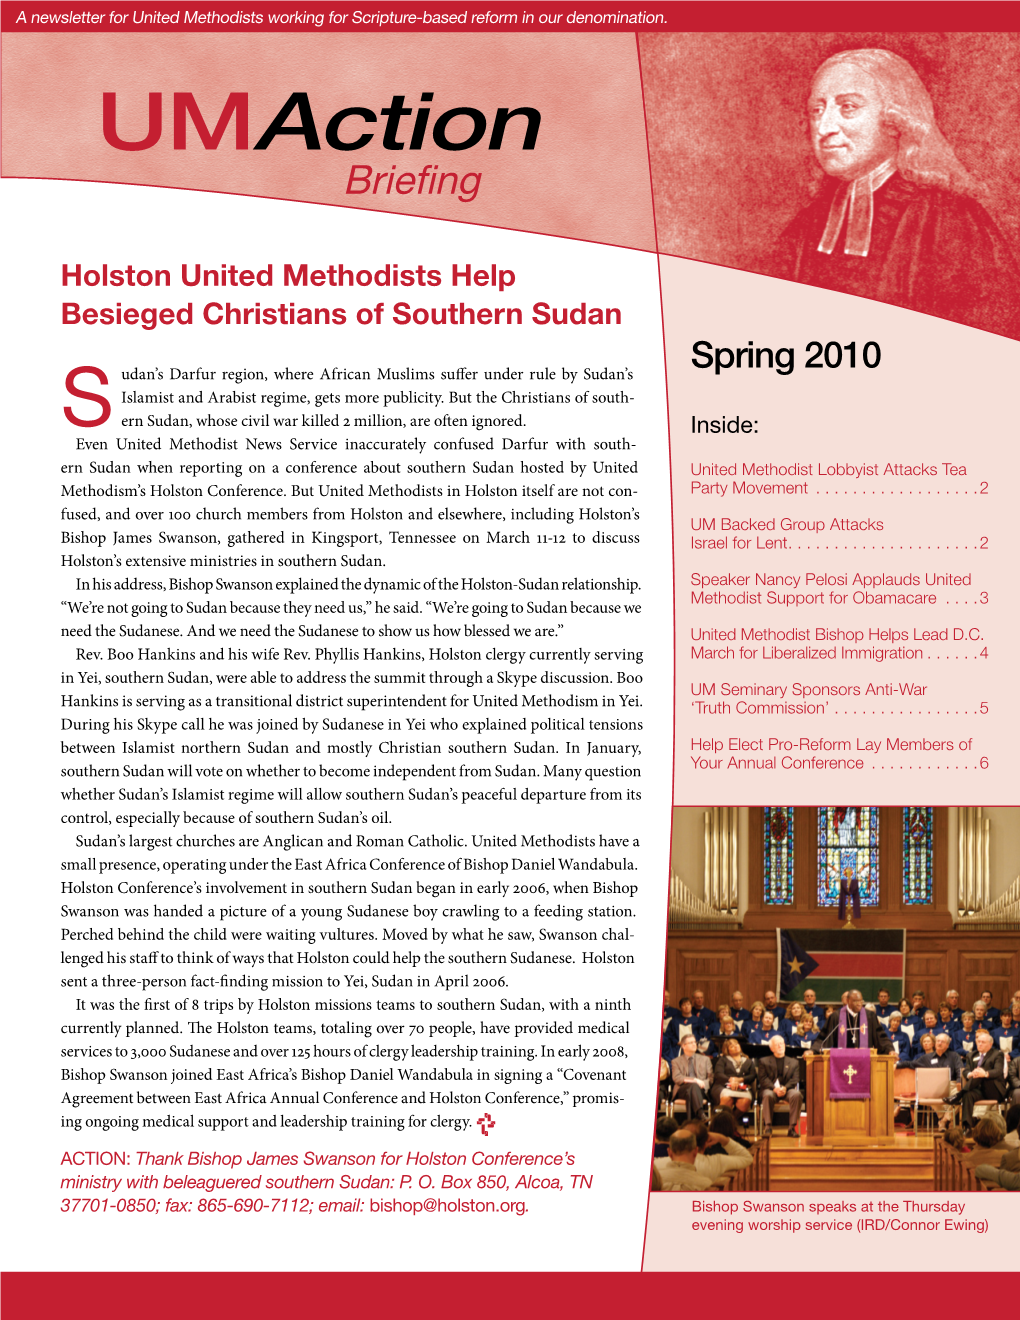 Umaction Briefing ❖ Spring 2010 a Newsletter for United Methodists Working for Scripture-Based Reform in Our Denomination